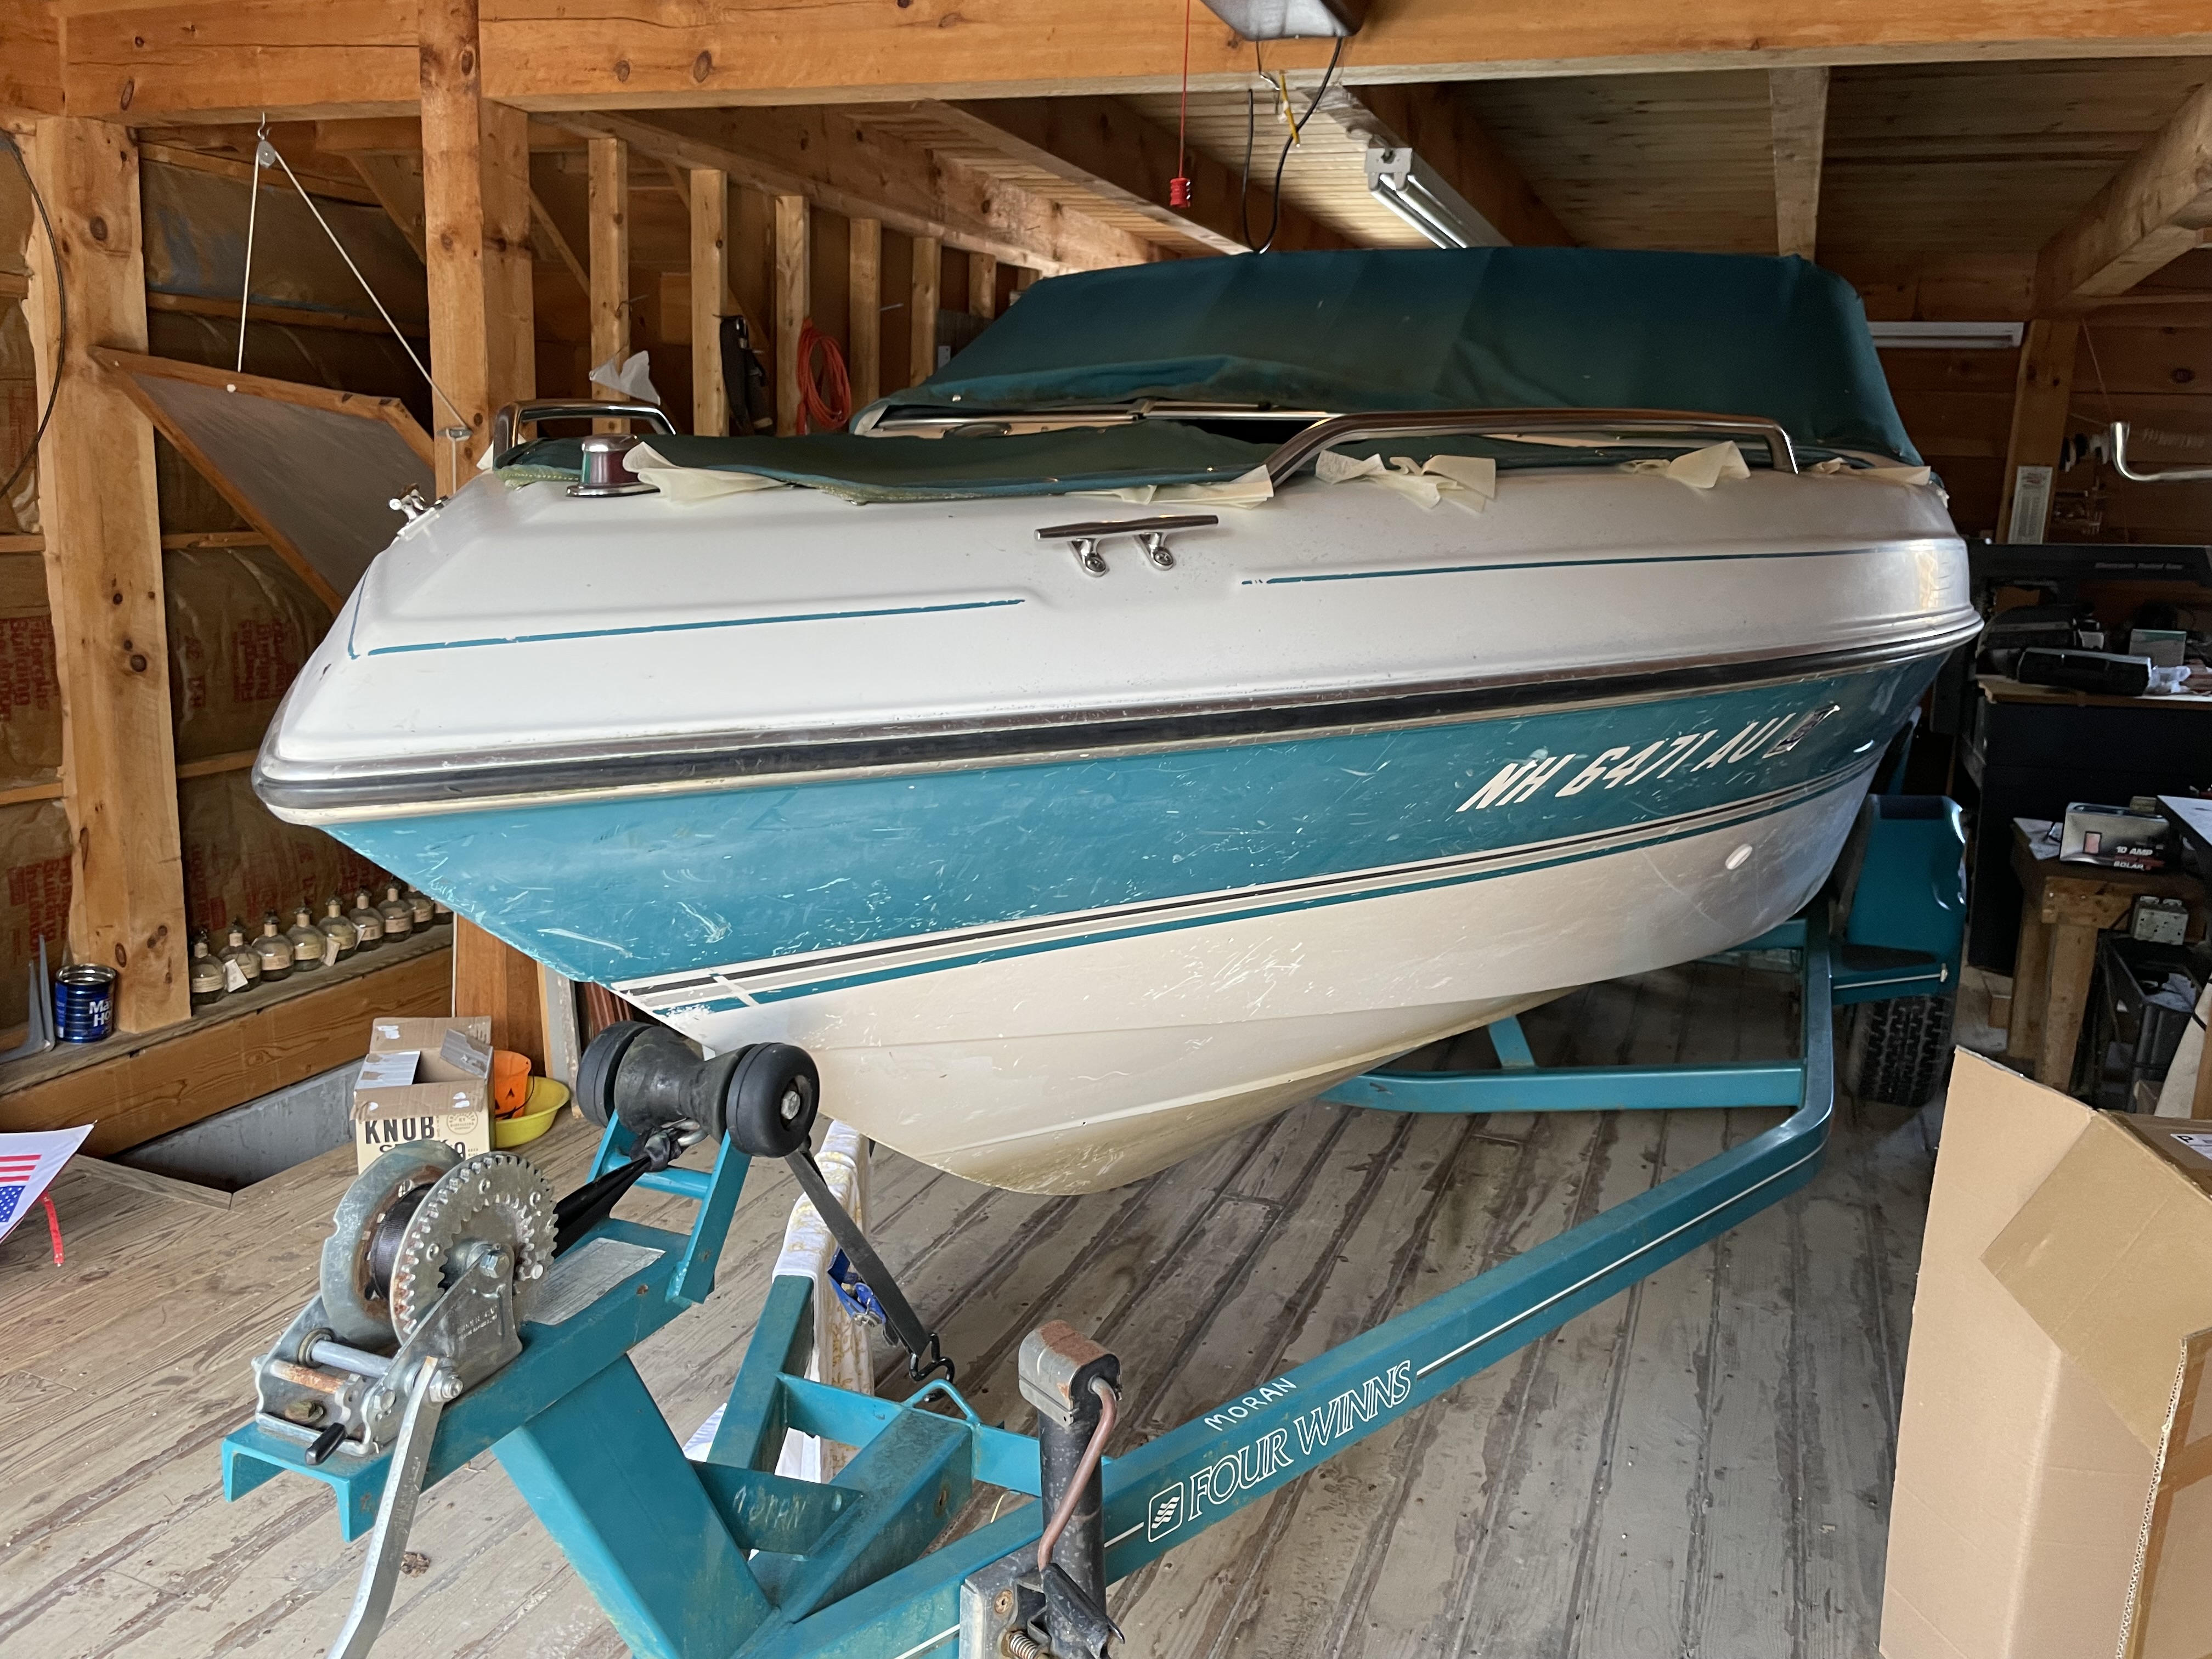 1995 19 foot FOUR WINNS horizon Power boat for sale in Wolfeboro, NH - image 1 